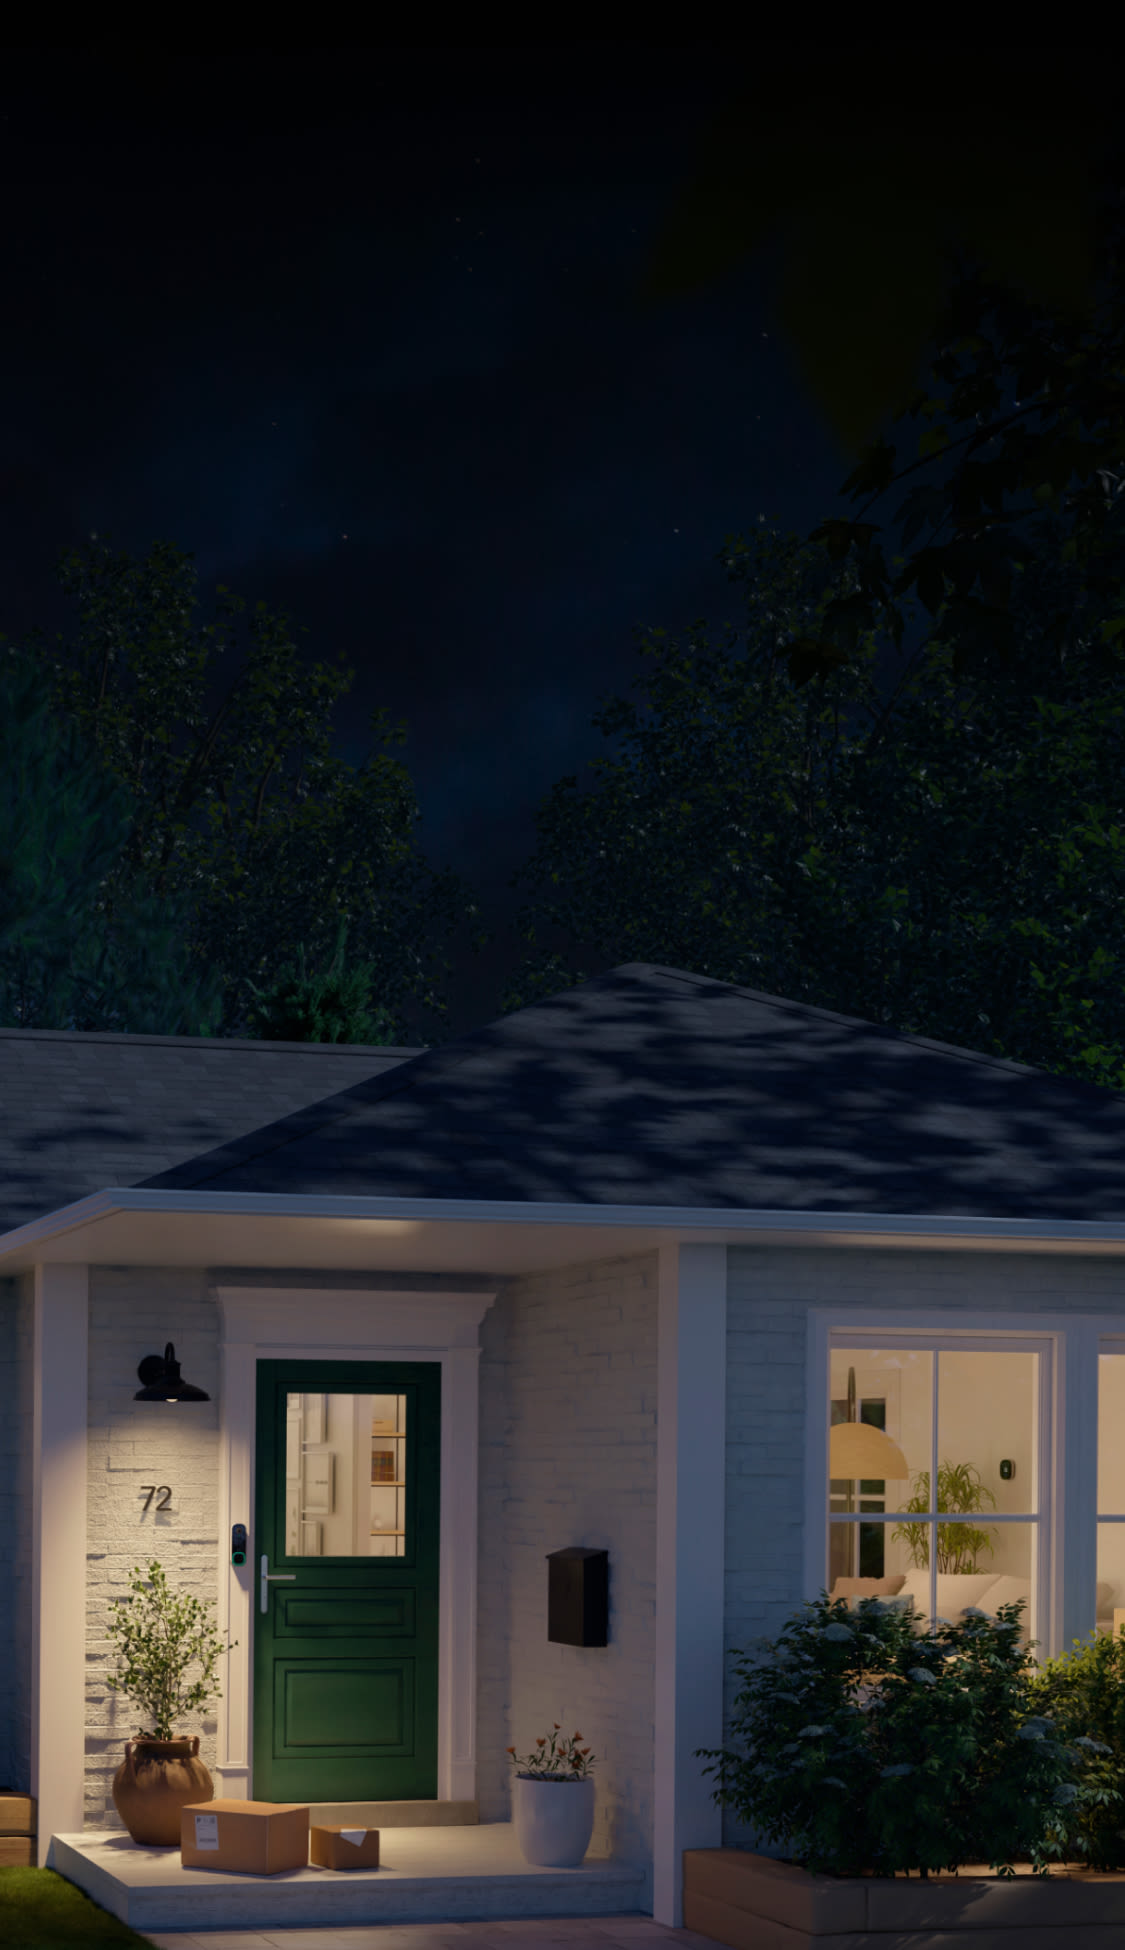 the front porch of a house lit up at night with ecobee smart doorbell camera next to the front door. there are packages on the front step.